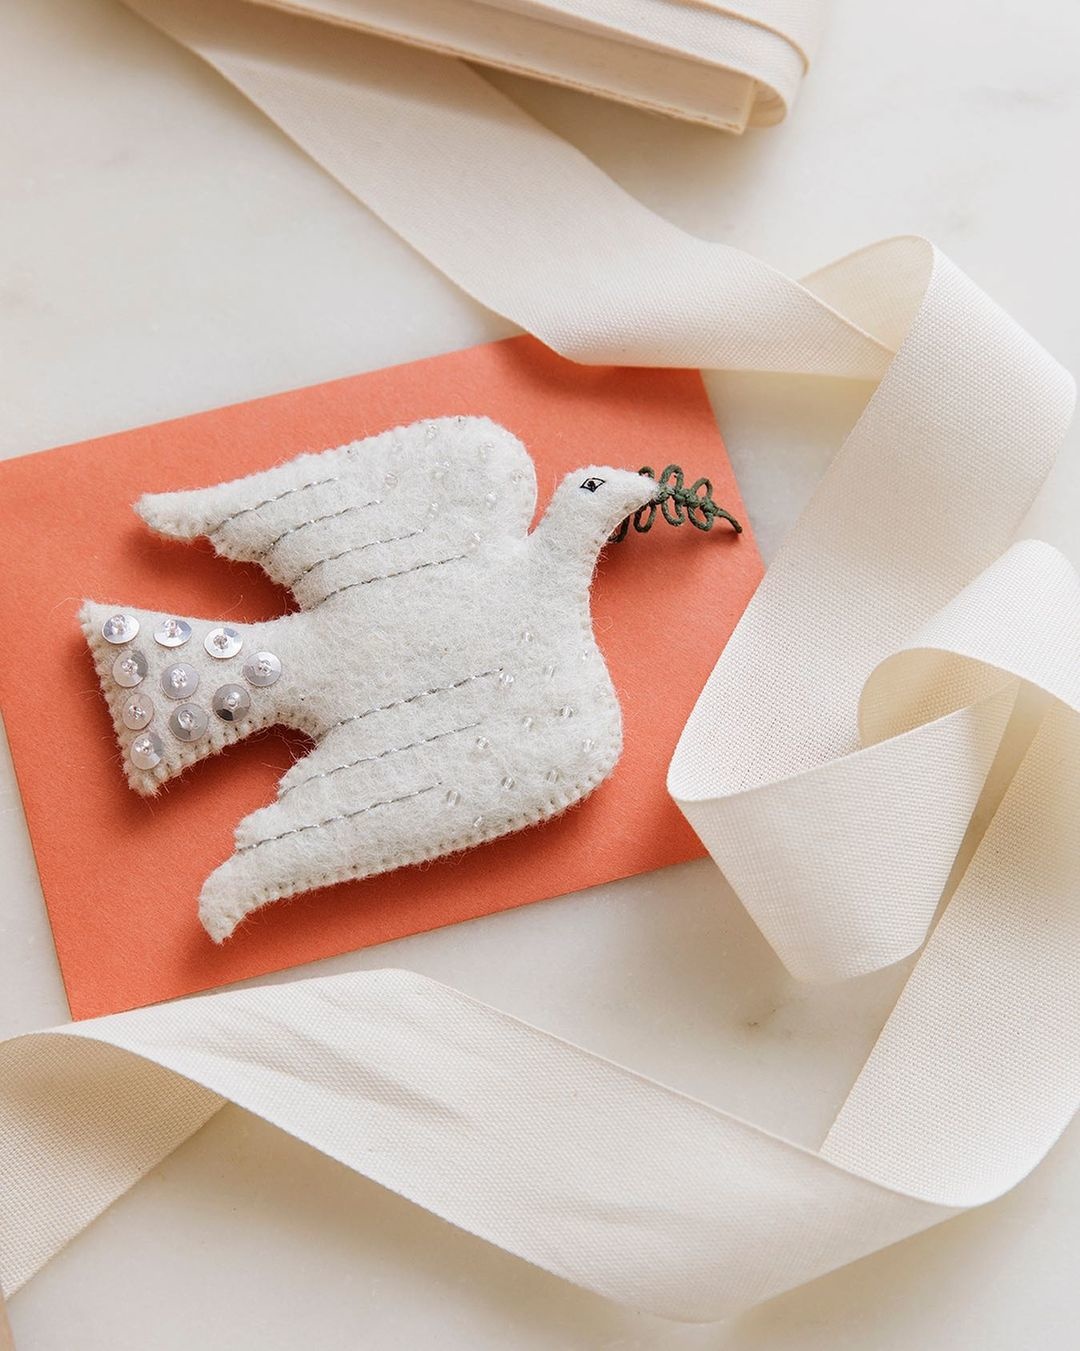 Meet Craftspring: Mind-Boggingly Adorable Ornaments Hand-Felted by Woman Artisans